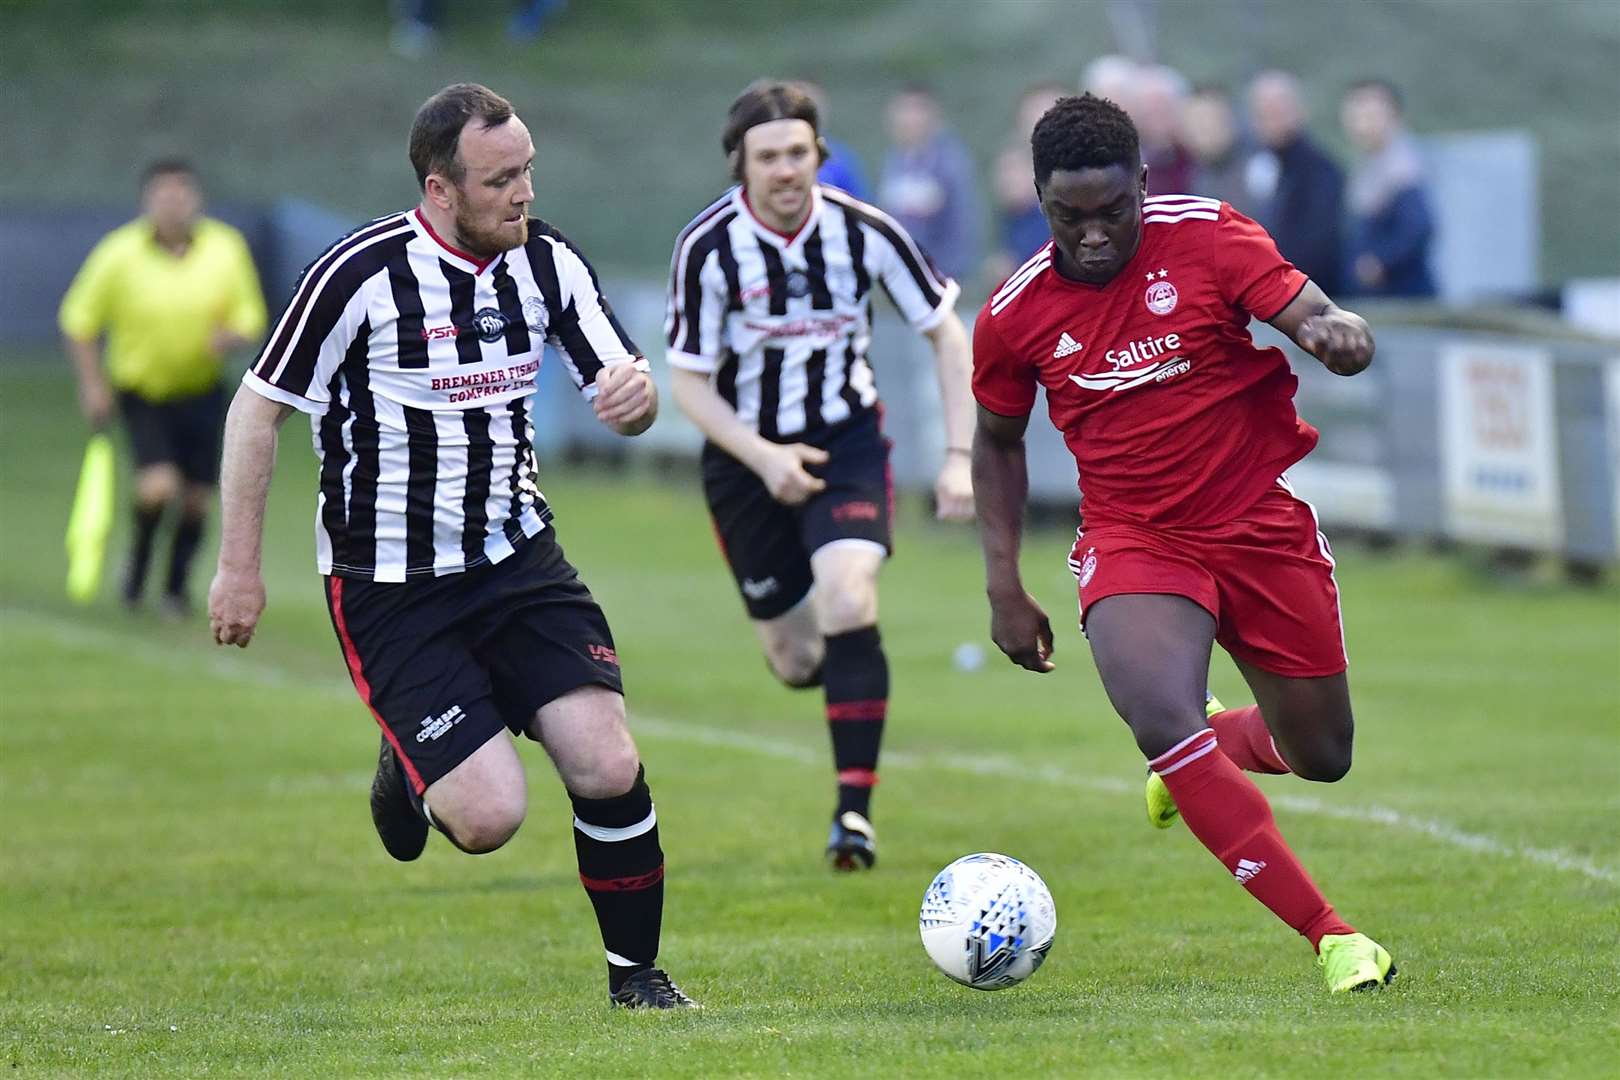 Aberdeen's David Dangana is tracked by Wick Academy veterans Stewart Ross and Shaun Sinclair, who were among the many second-half substitutes in the Richard Macadie testimonial match. Picture: Mel Roger